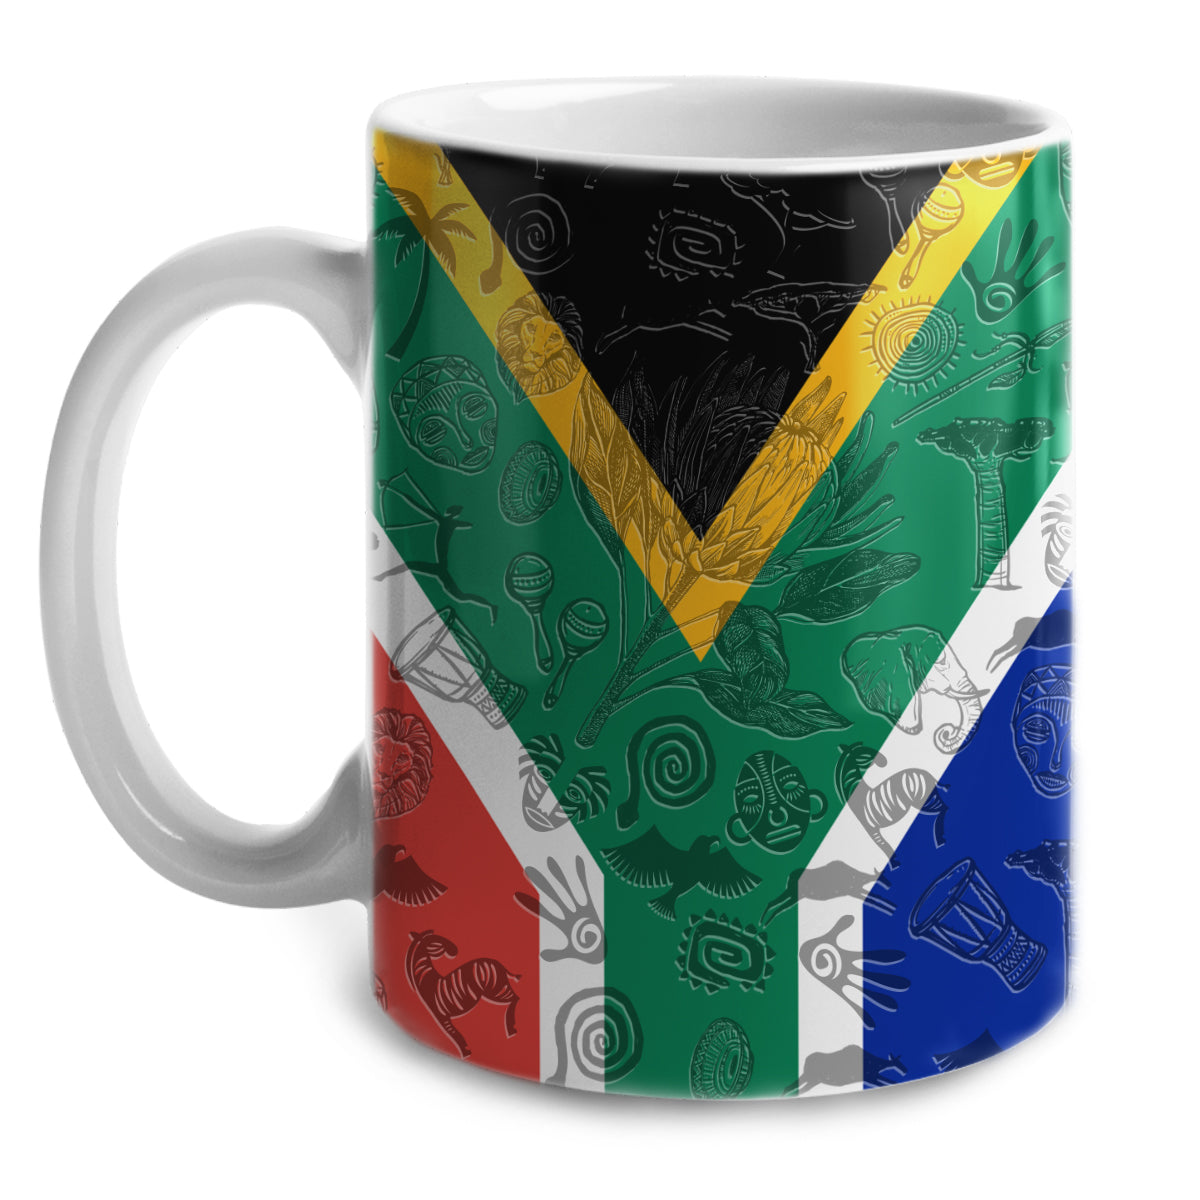 South Africa White Coffee Mug With Flag And Symbols, South Africa Souvenirs And Gifts